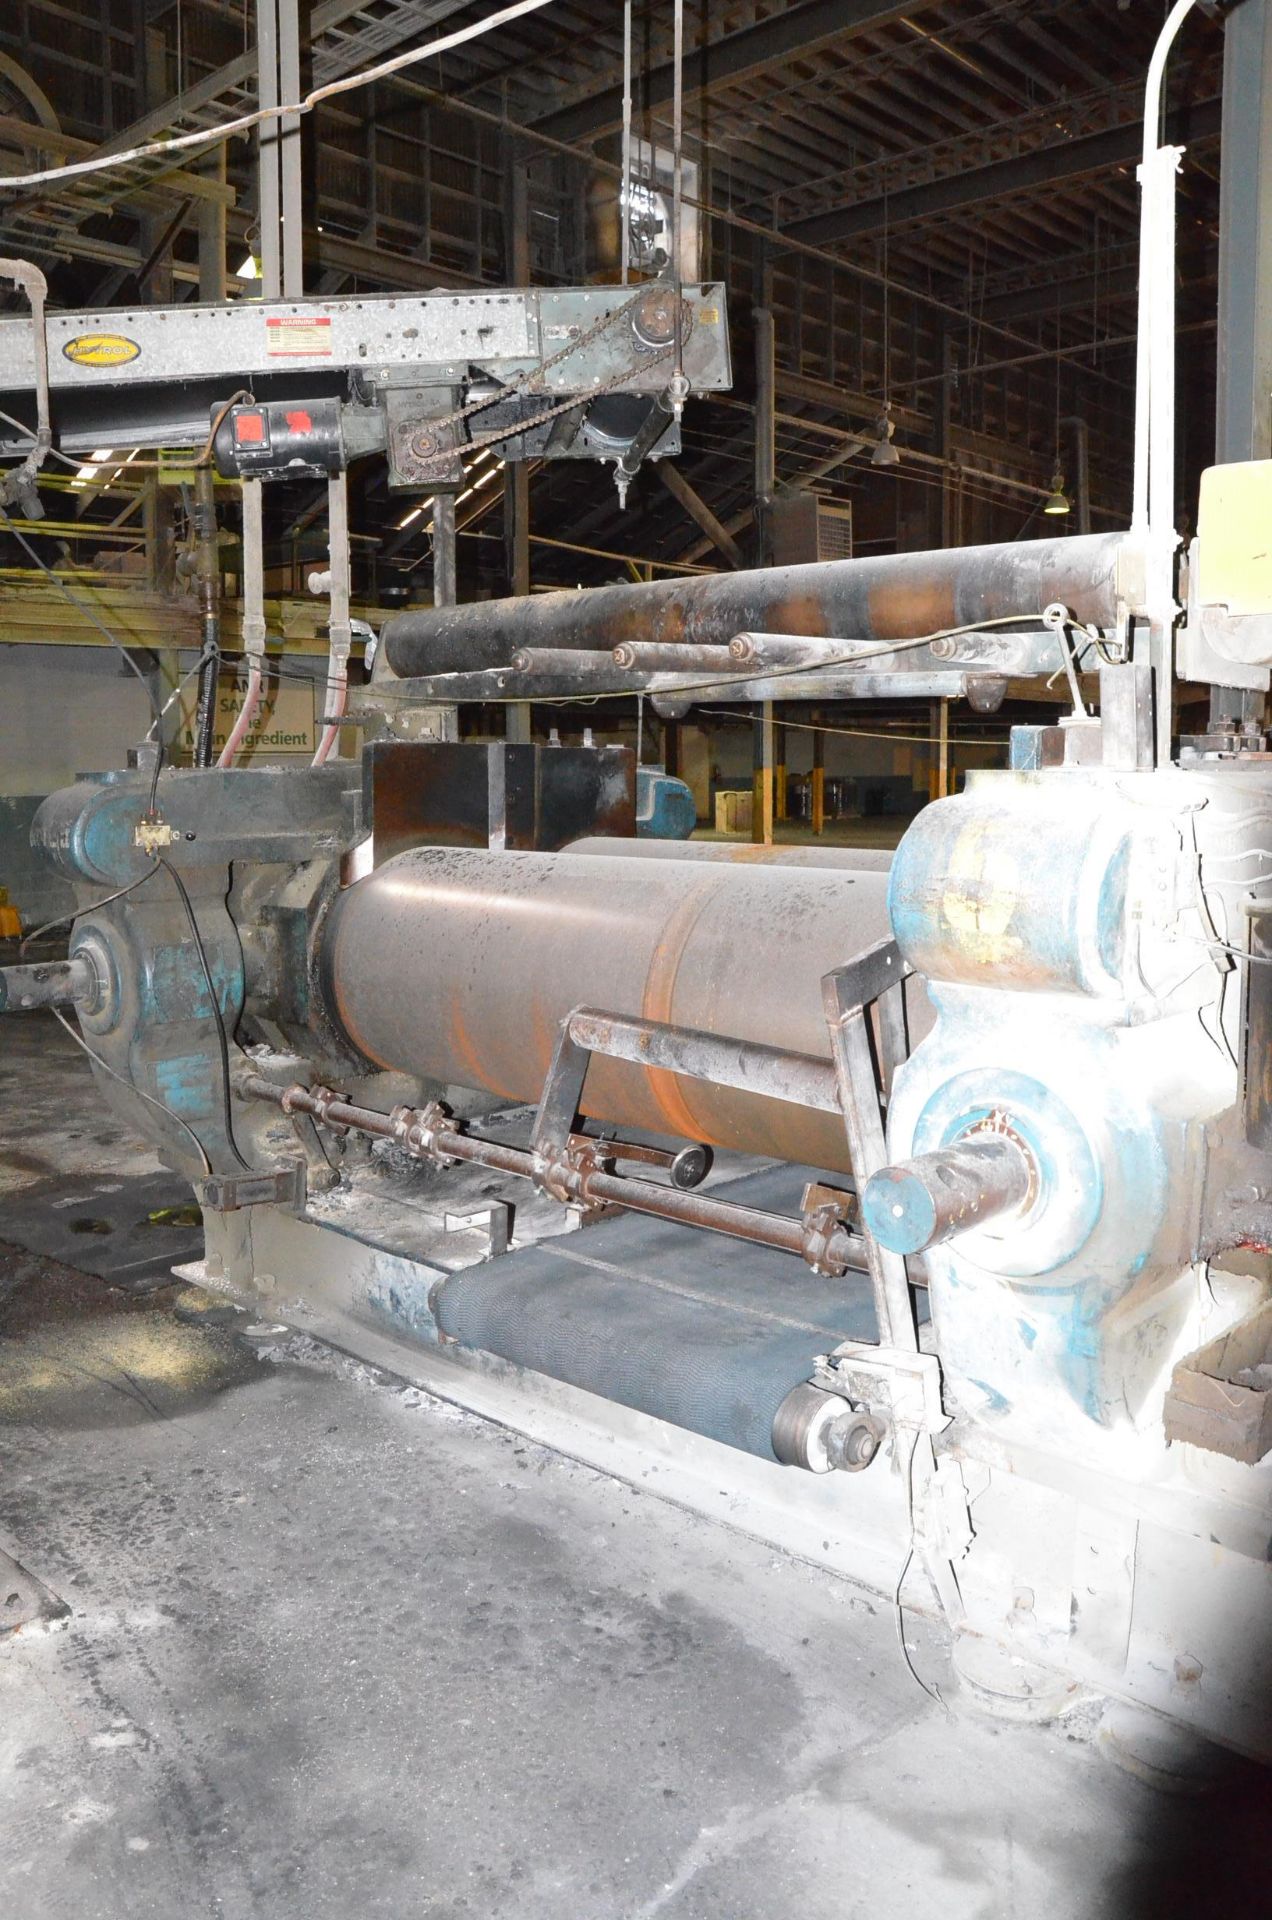 STEWART BOLLING 26" x 26" x 84" TWO ROLL RUBBER MILL WITH 26" DIAMETER CORED SMOOTH ROLLS, 84" - Image 7 of 10